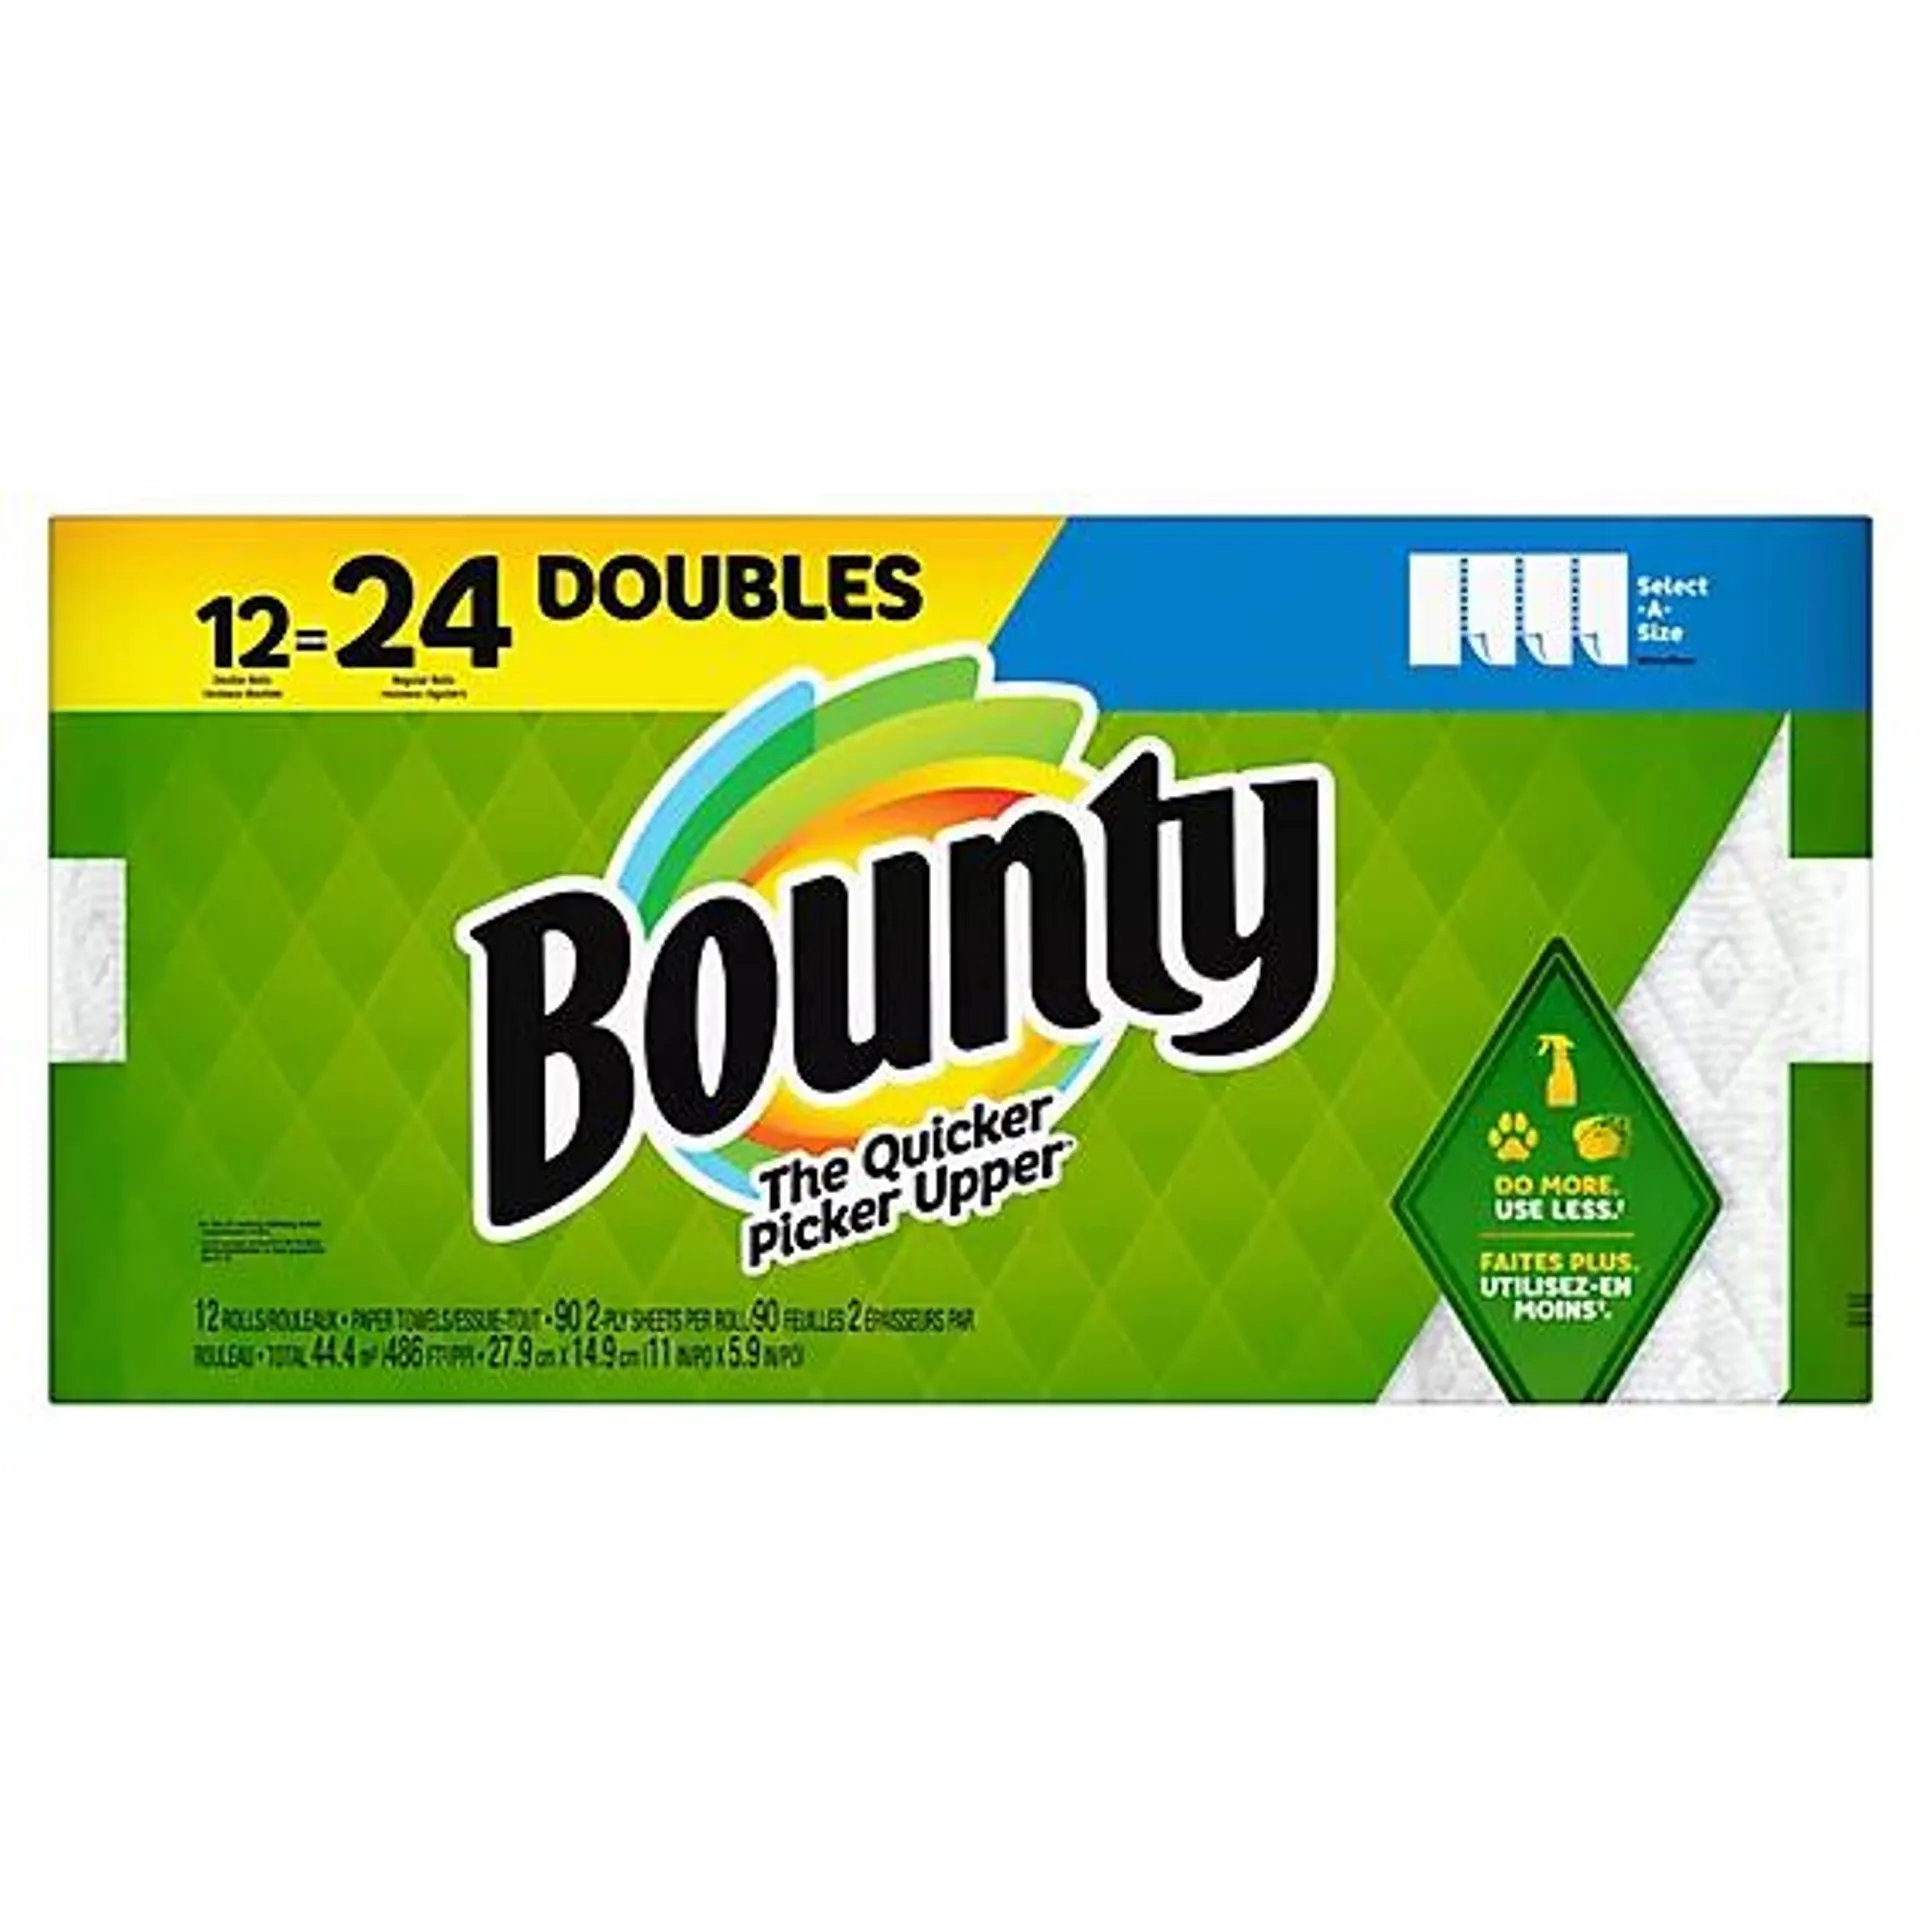 Bounty 12 Double Roll Select A Size White Tissue - 12 Count